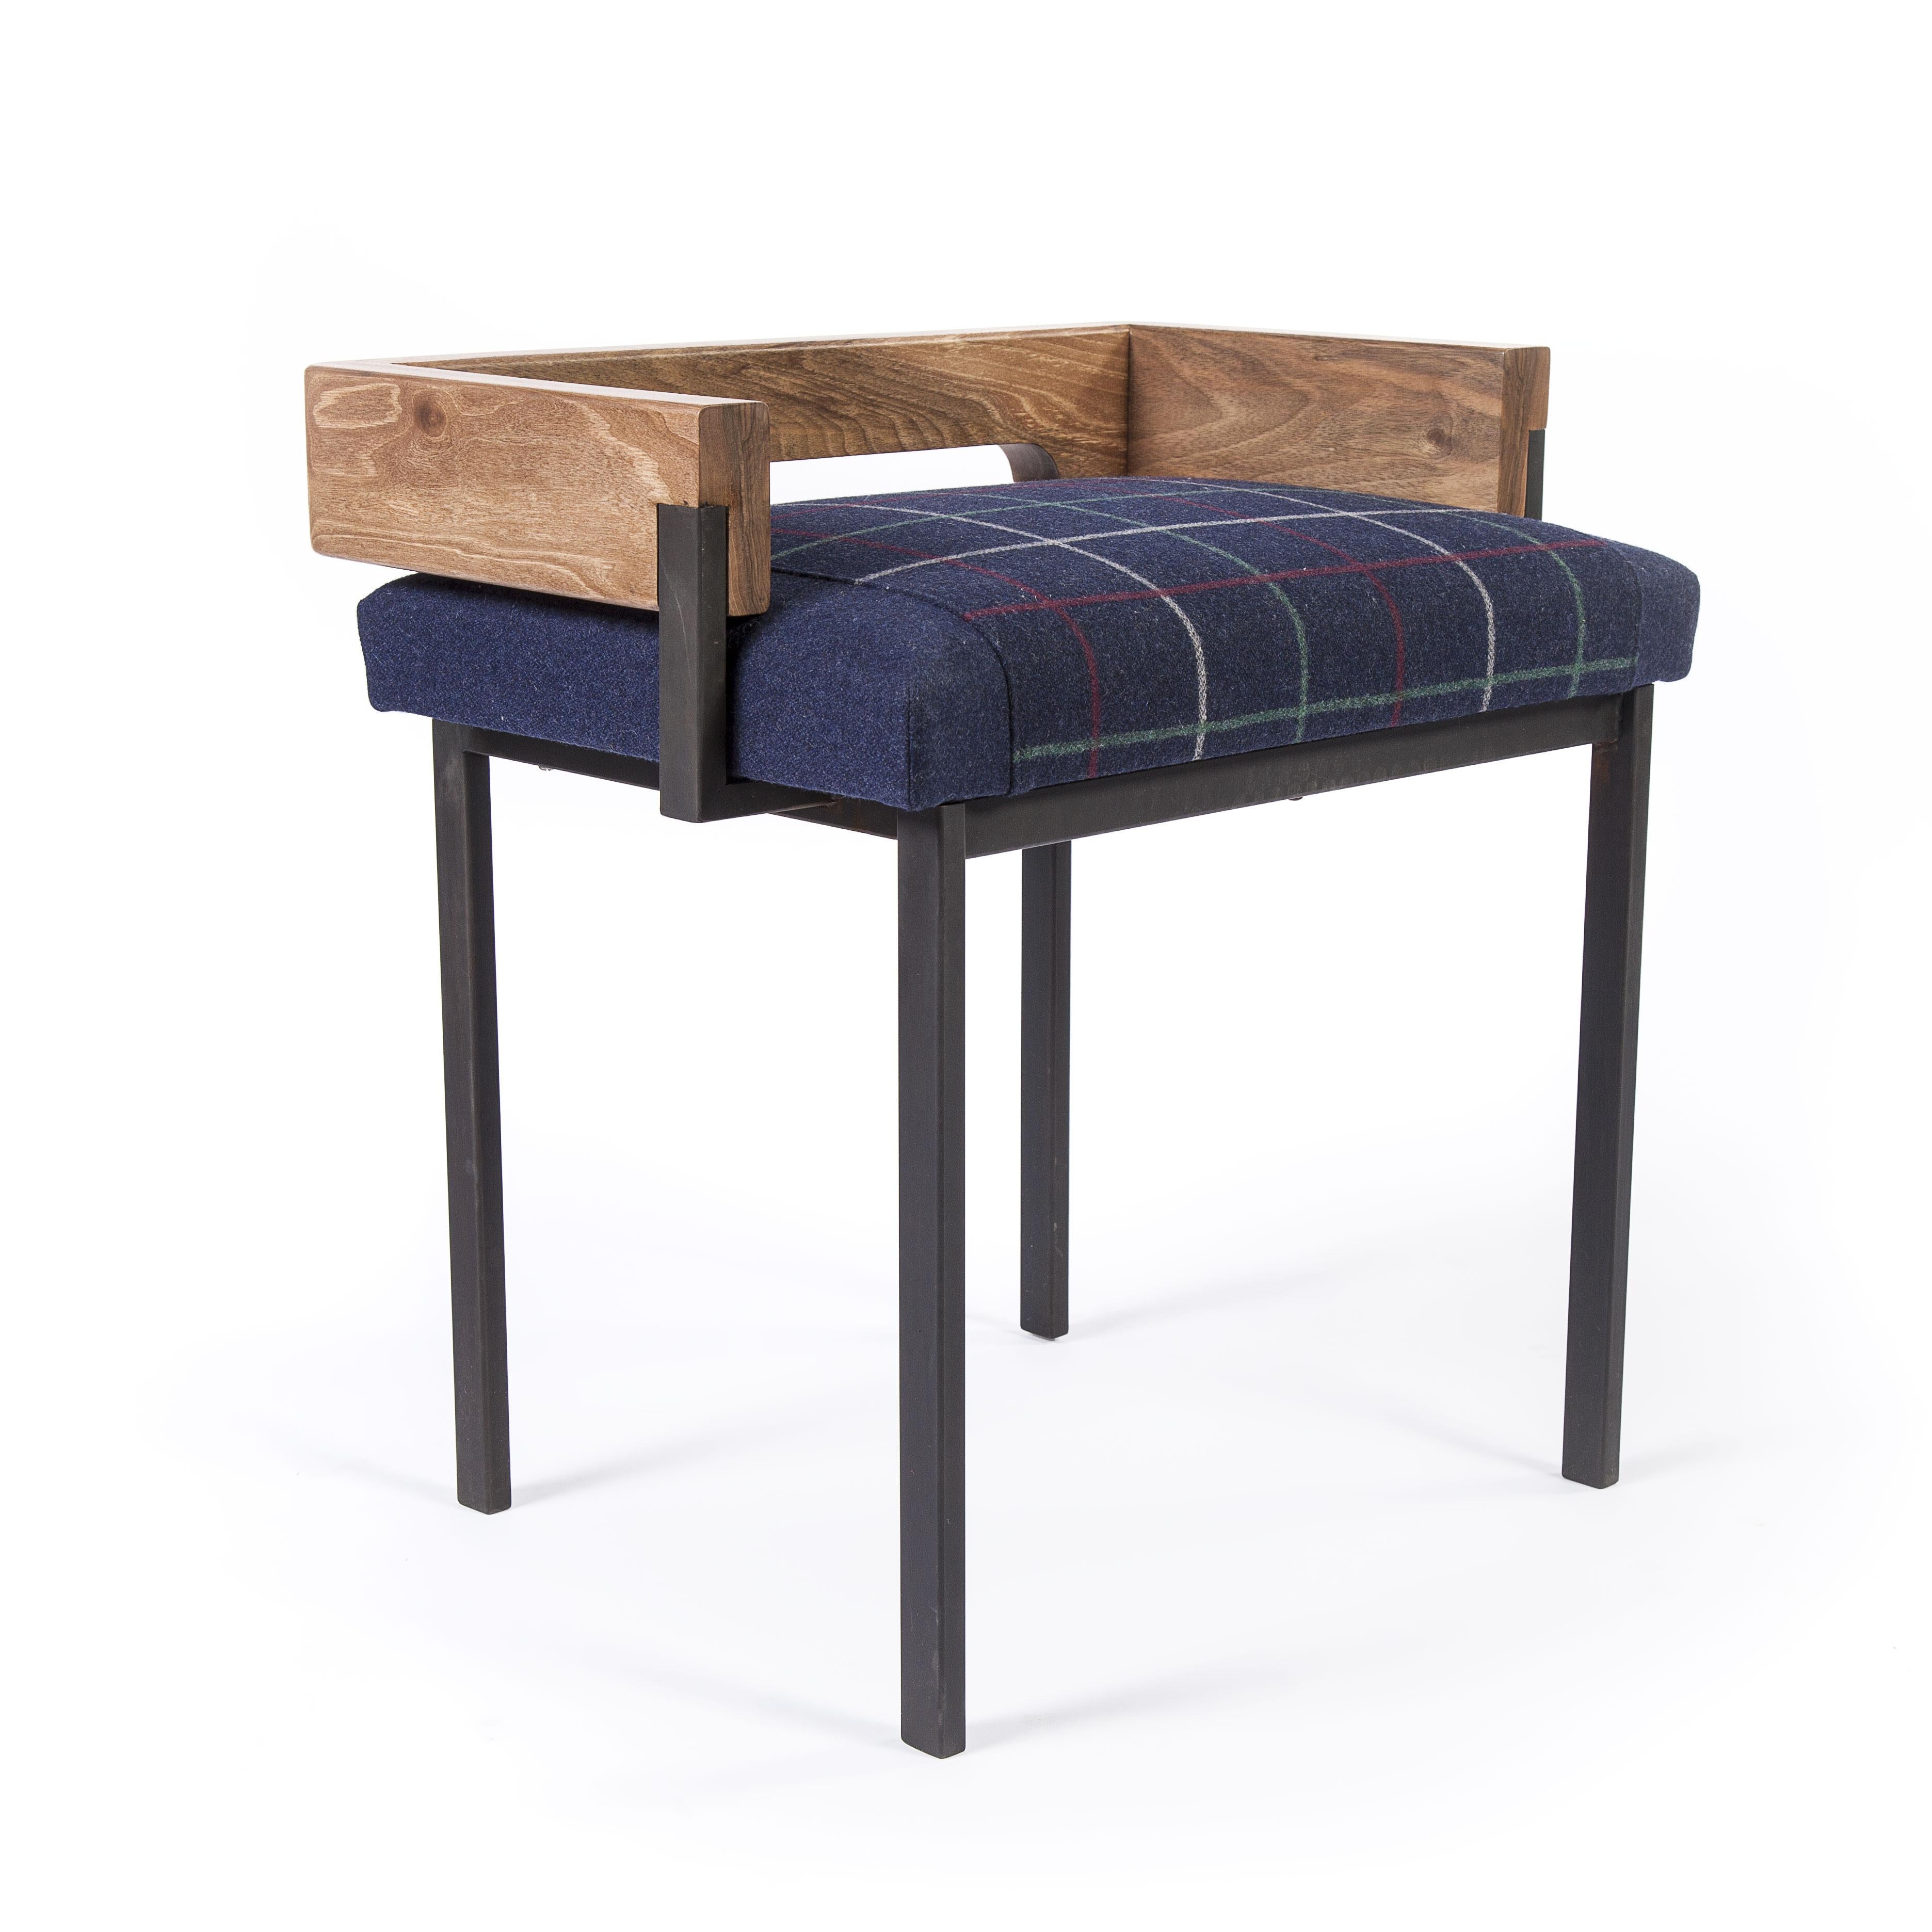 Arms stool by Charlotte Besson-Oberlin
Dimensions: 52 x 54 x 53 cm
Materials: Iron, wood

Four long and slender legs which carry a strapped seat, accomplice of the Arms armchair, it is small and practical to move. It will be the perfect booster